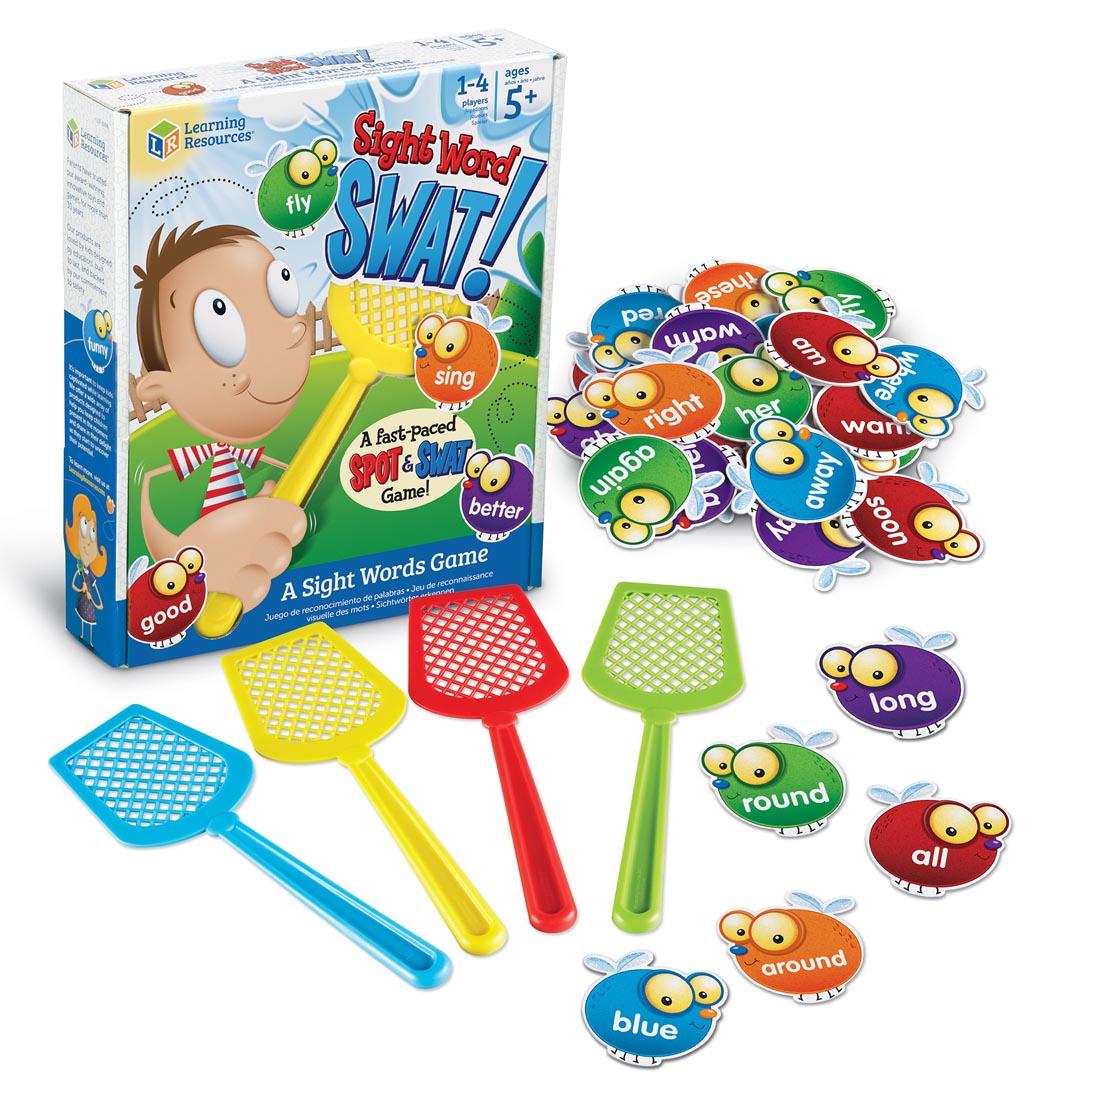 Sight Words Swat! Sight Words Game with game pieces shown outside packaging